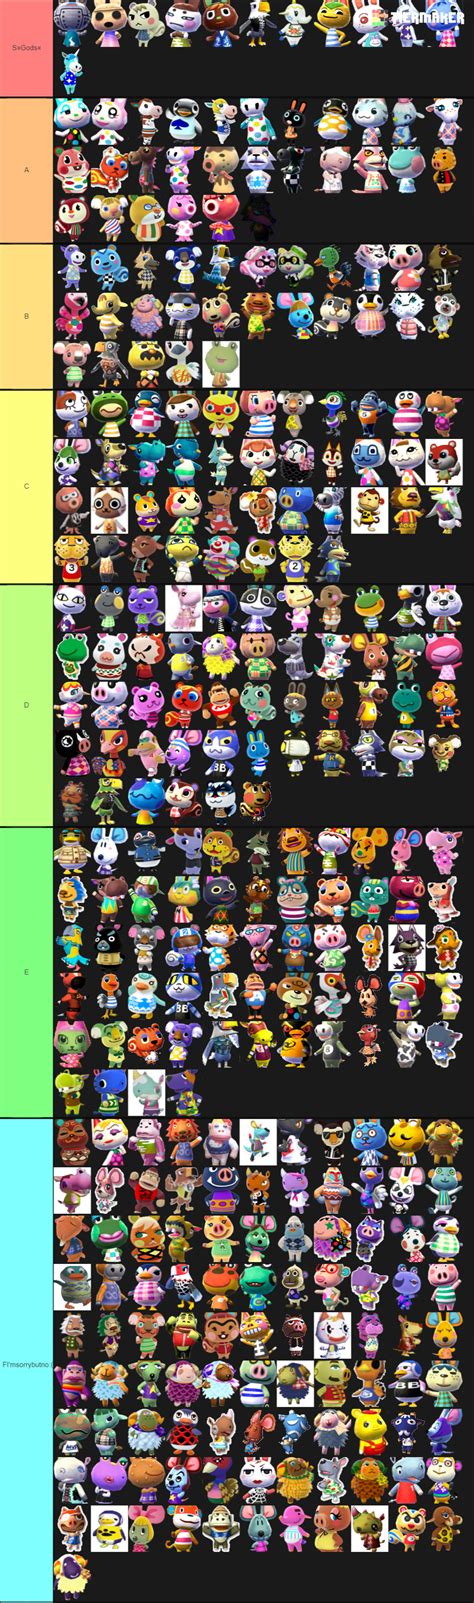 Animal crossing new horizons villager tier list. Animal Crossing New Horizons was released on March 20, 2020, for Nintendo. Since that date, a considerable number of players have experienced the game. It has garnered high praise from players, and we have now decided to create a tier list. Let’s take a look at our table for the Animal Crossing Villager Tier List. Animal Crossing … 